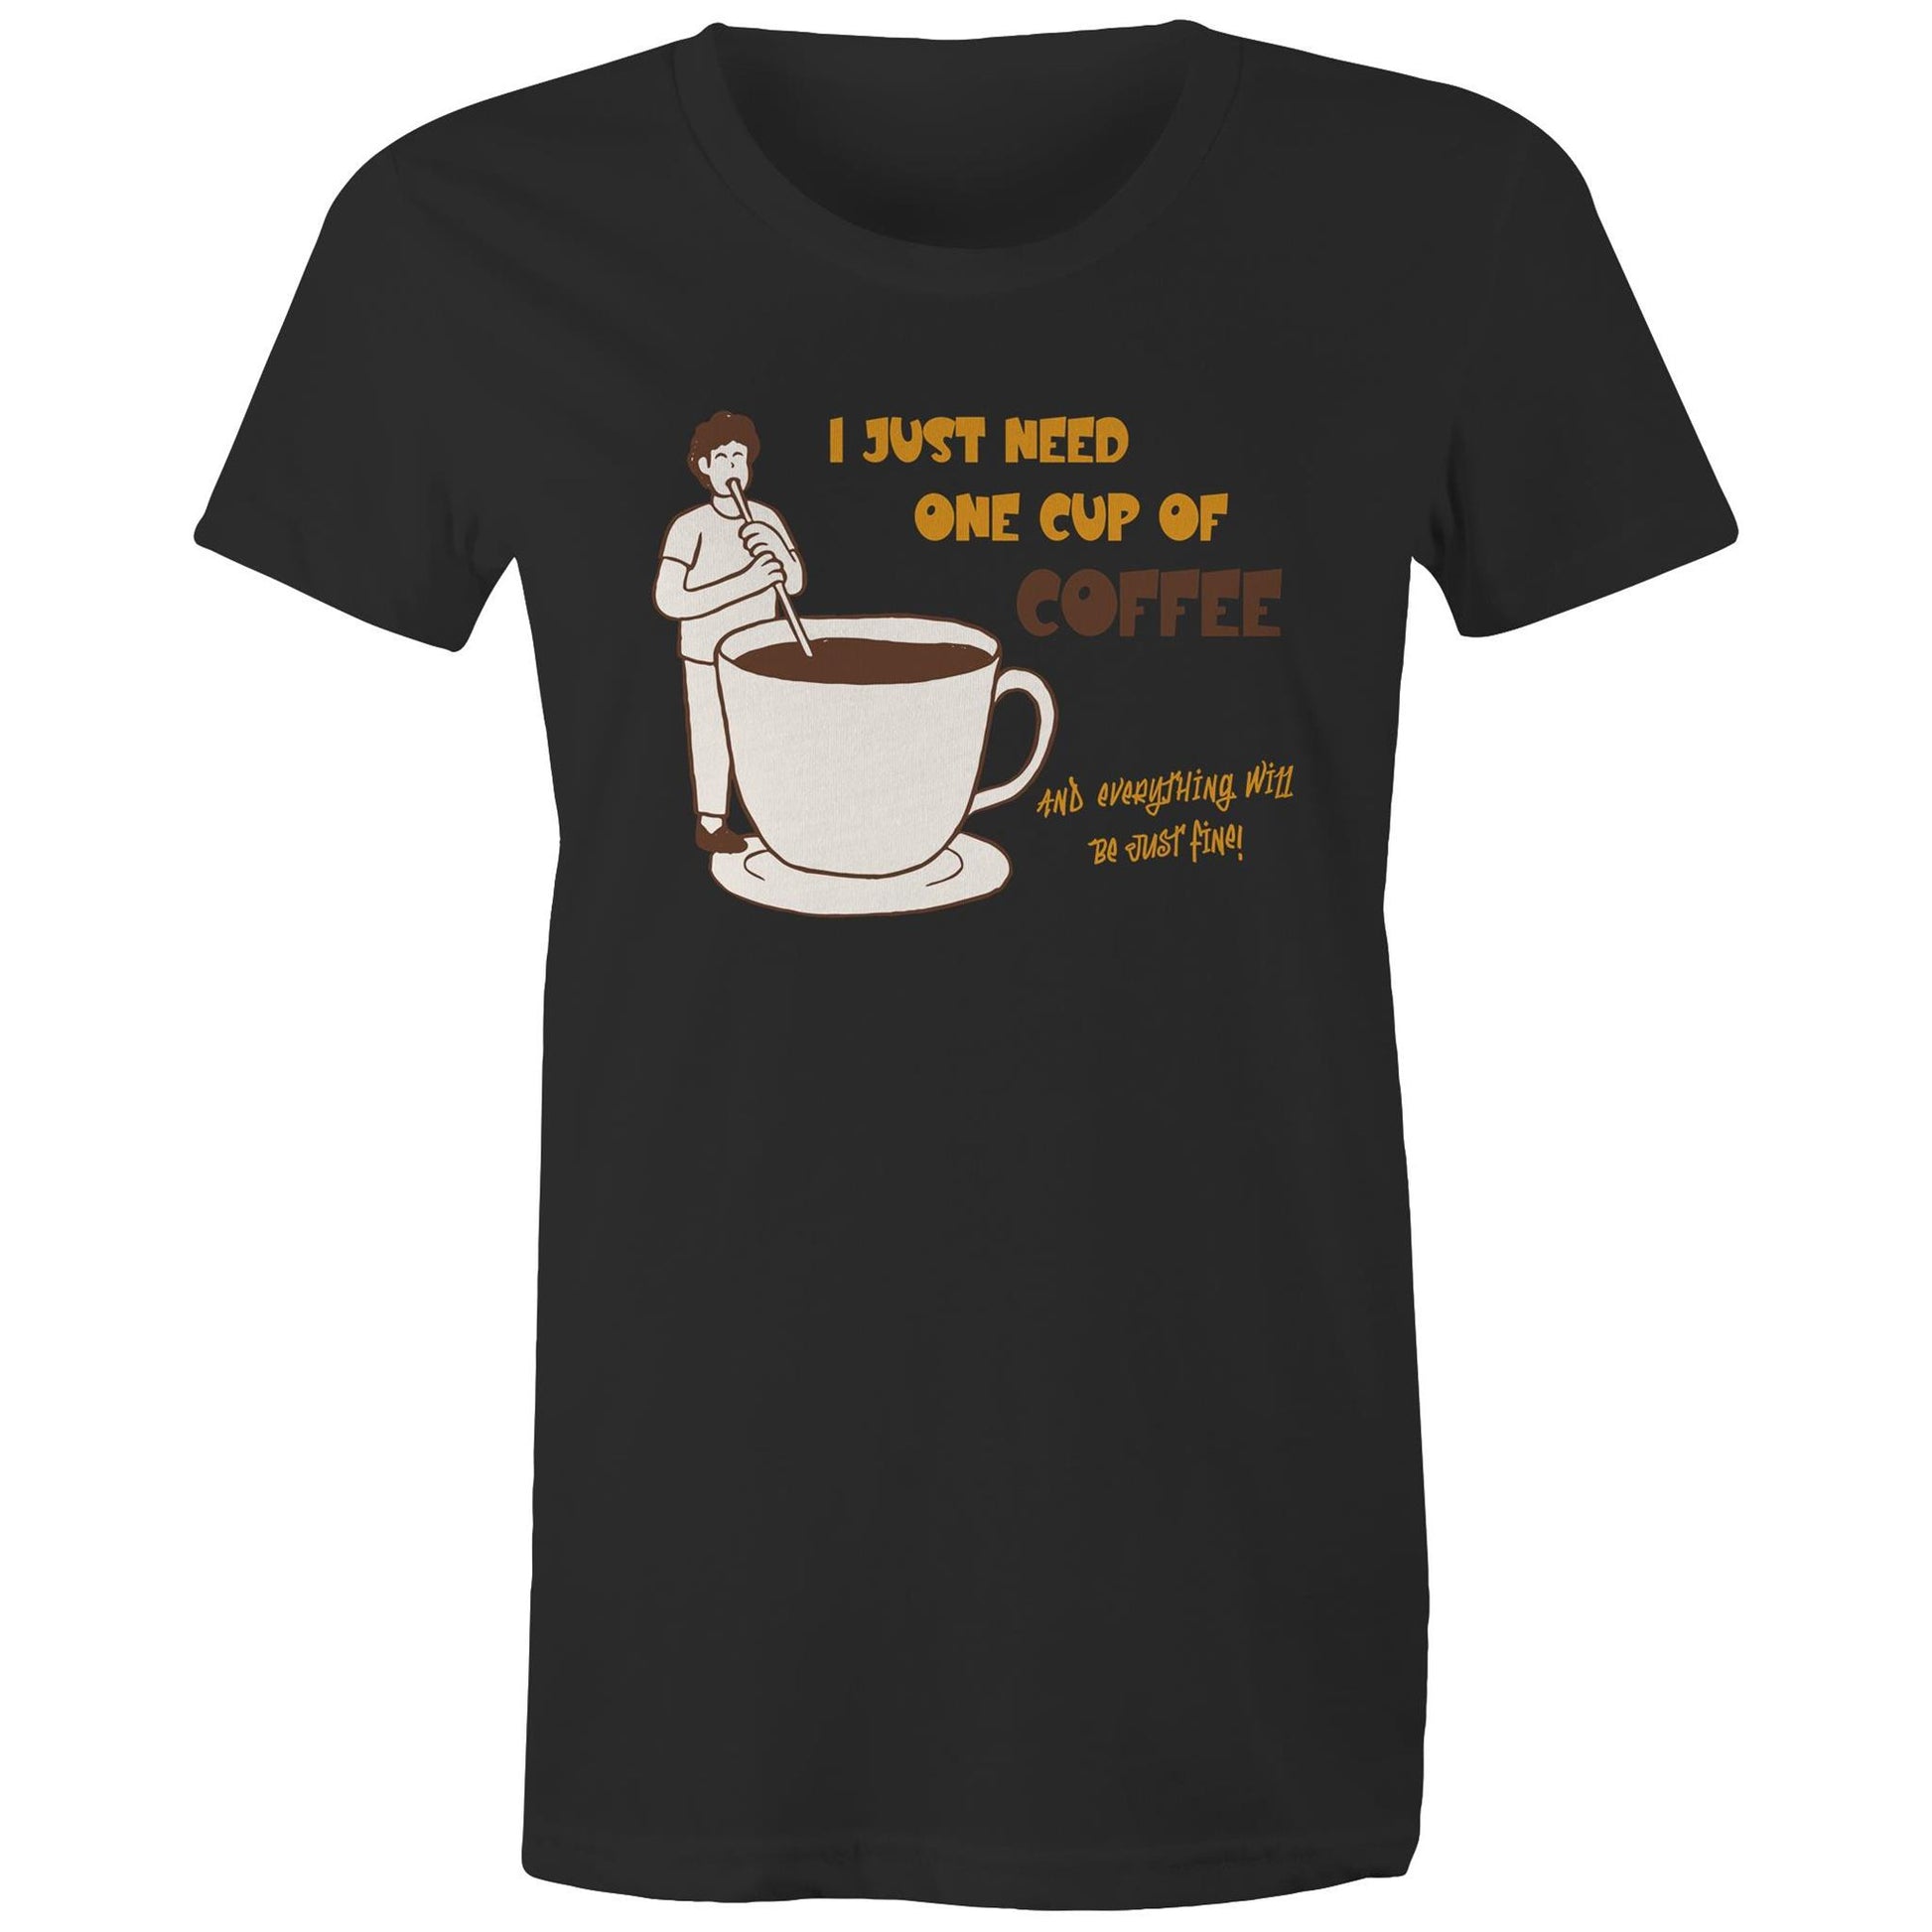 I Just Need One Cup Of Coffee And Everything Will Be Just Fine - Womens T-shirt Black Womens T-shirt Coffee